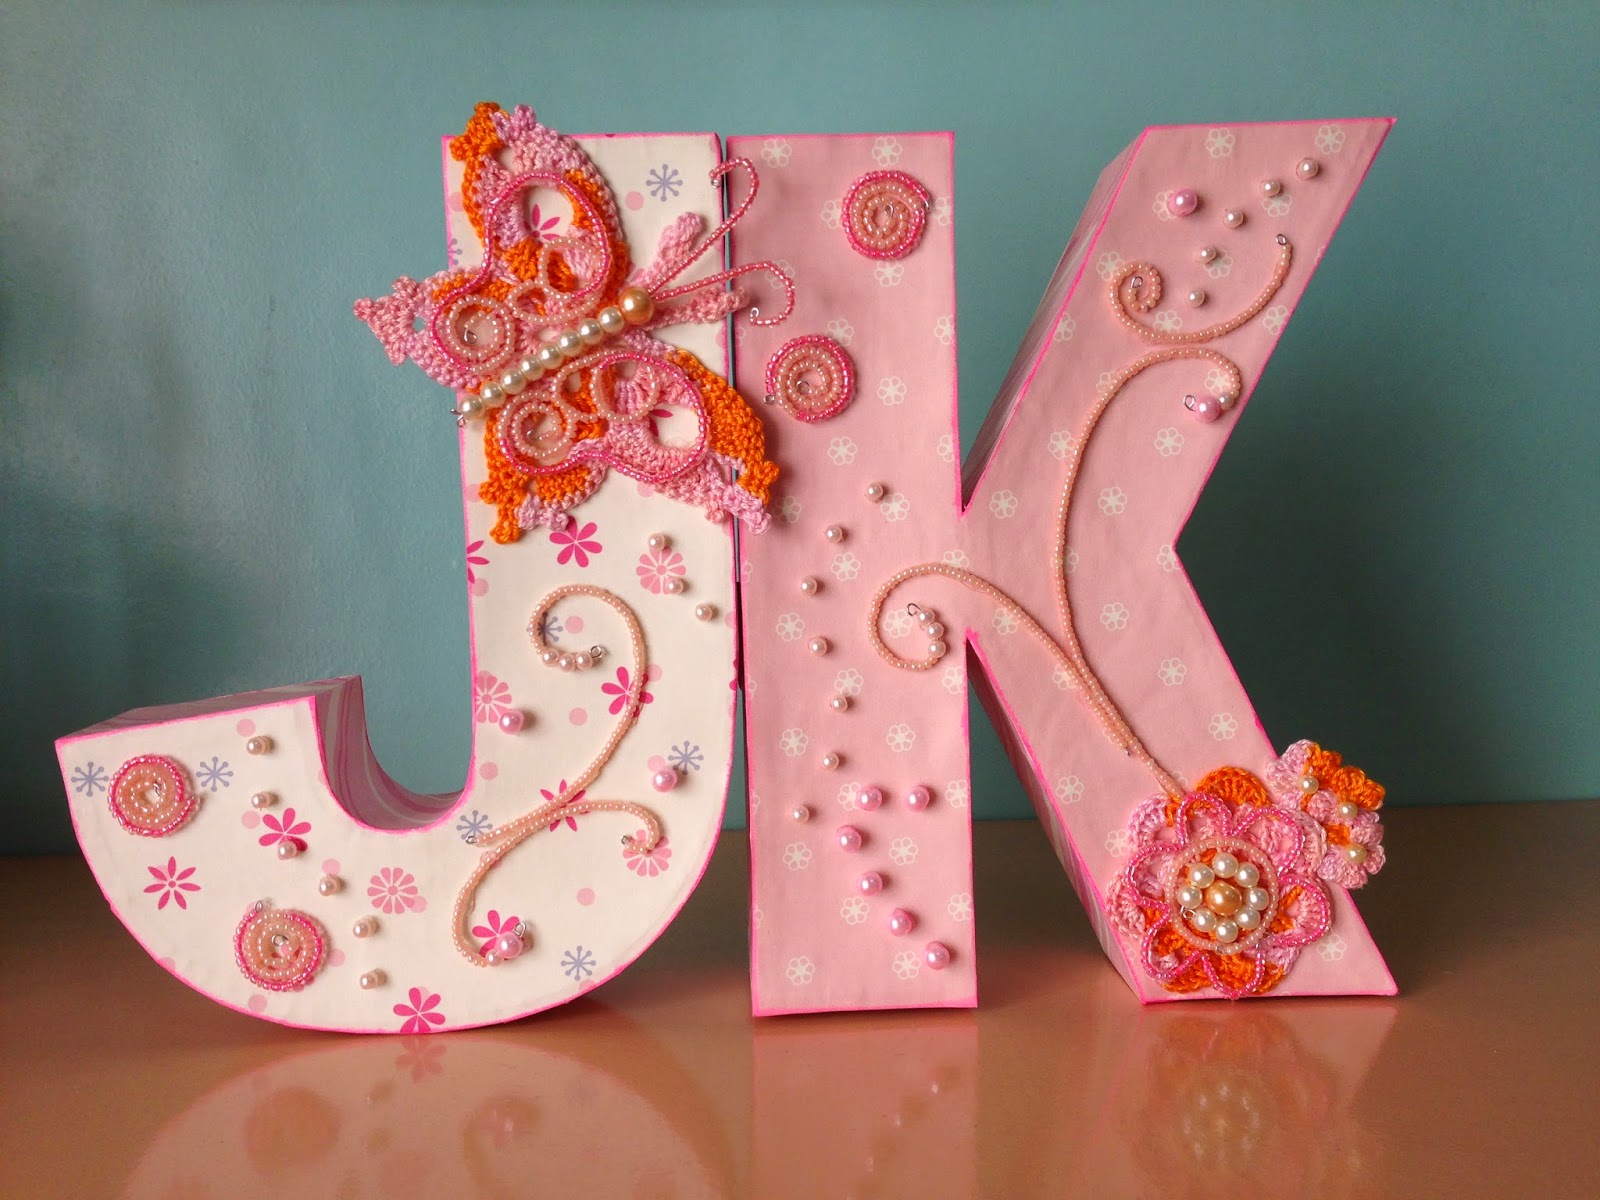 So Many Things to Do, So Little Time: Make and Decorate Your Own Letter